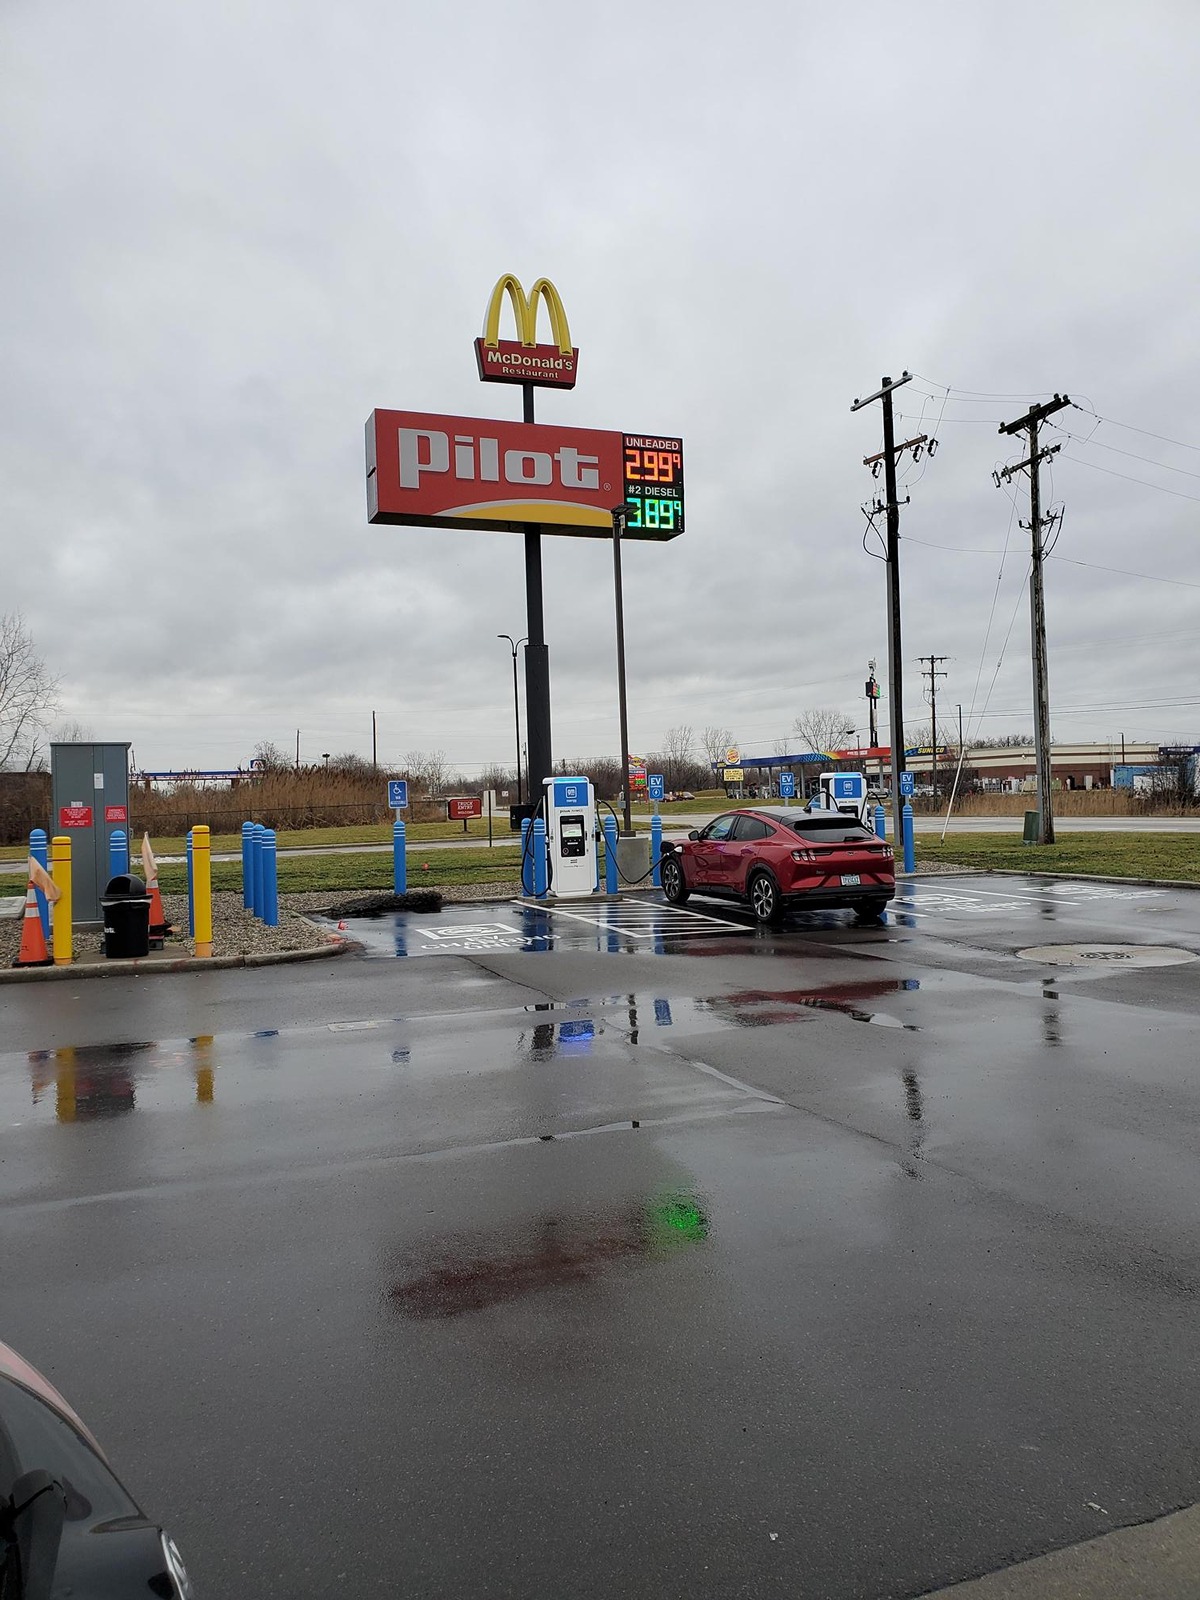 Ford Mustang Mach-E BP to Buy Supercharger Sites marathon pilot gas station in michigan